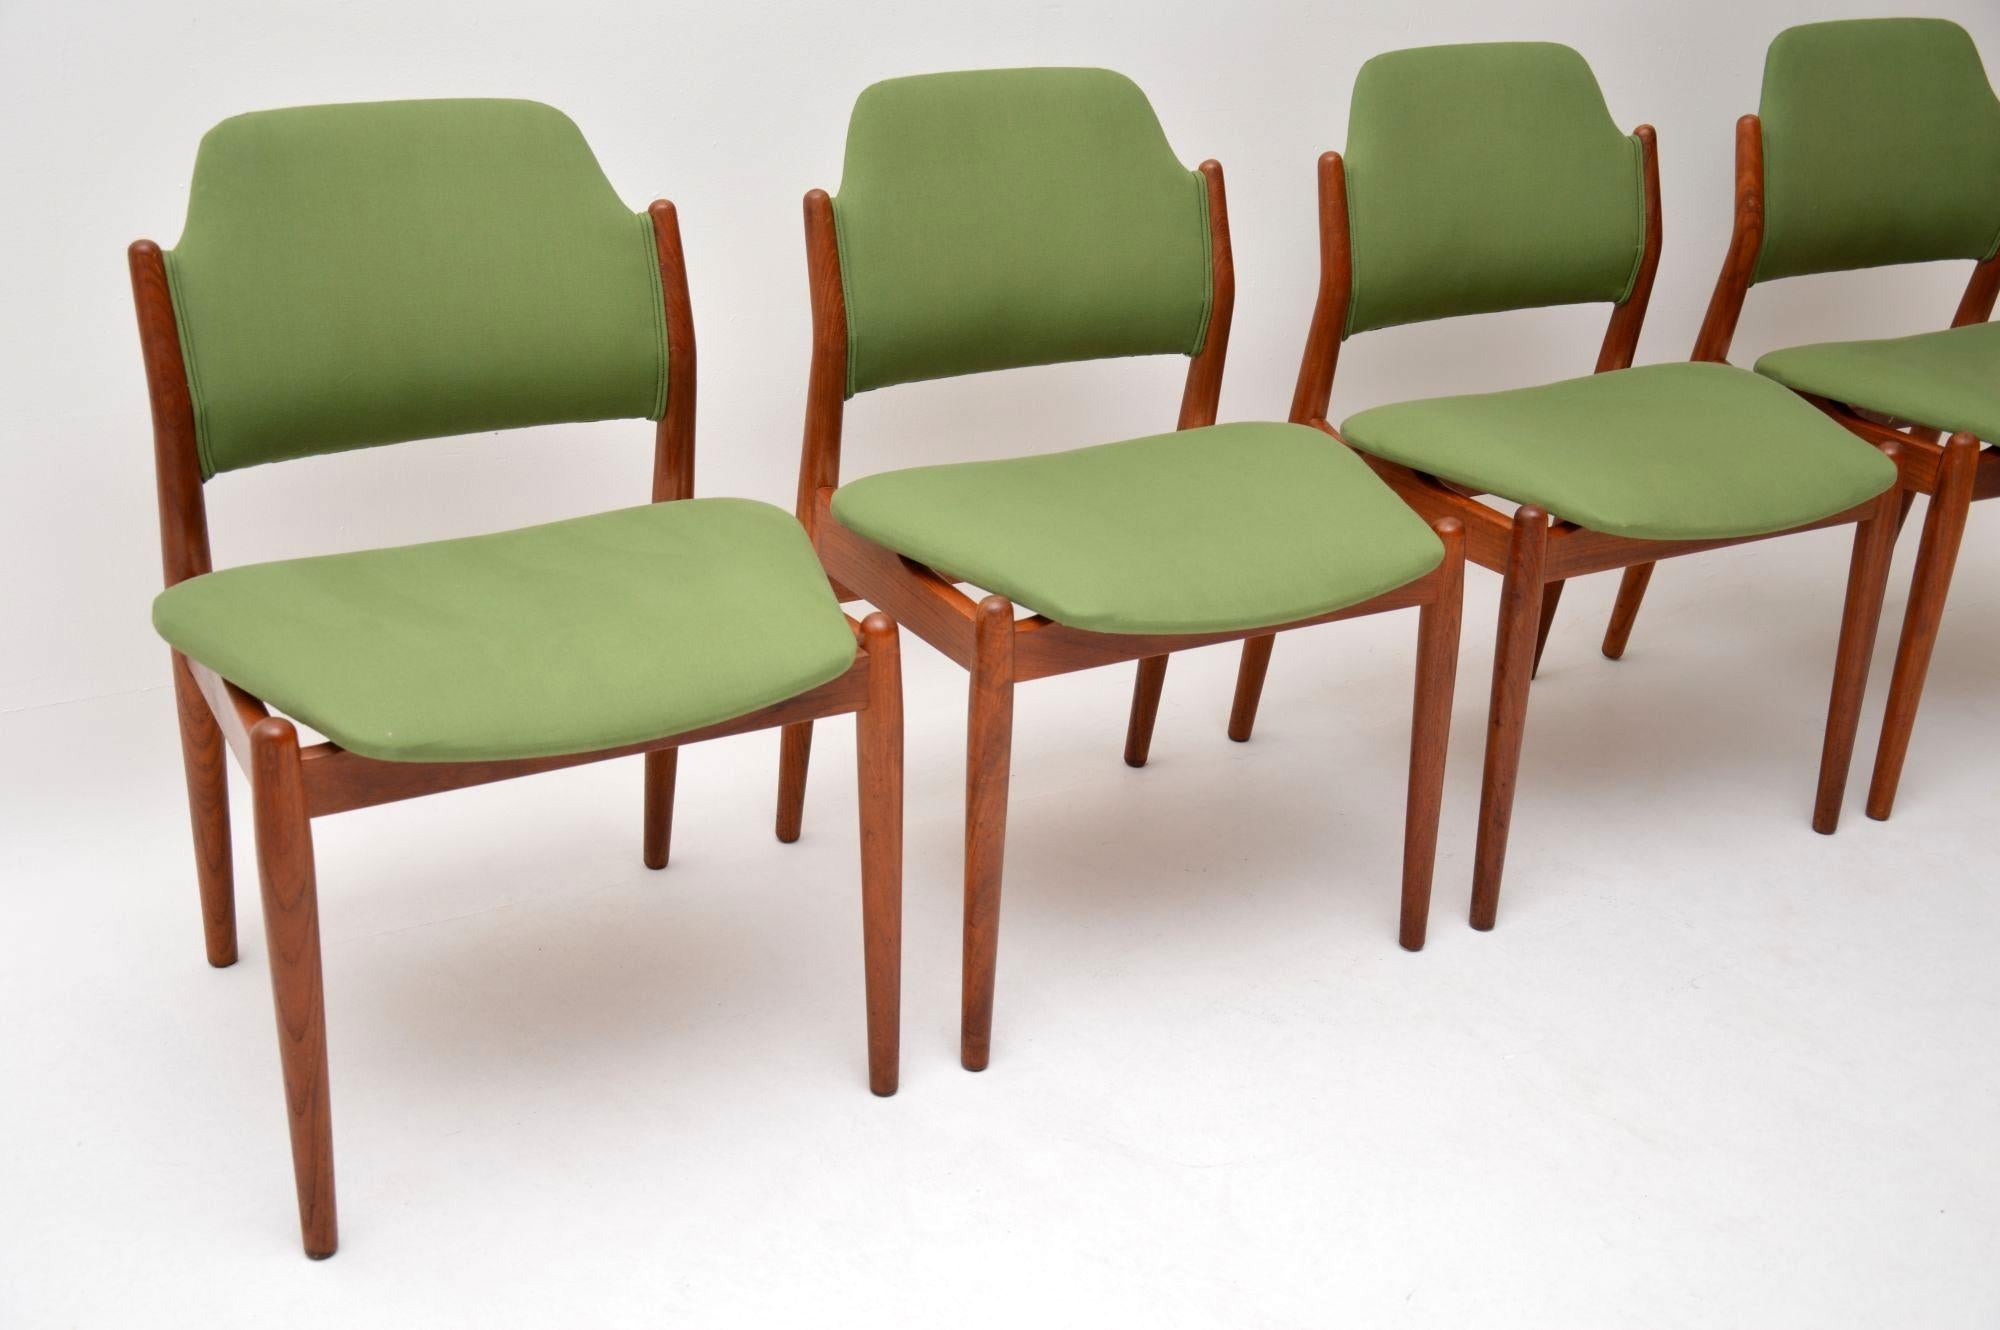 Mid-20th Century 1960s Set of 4 Danish Teak Dining Chairs by Arne Vodder